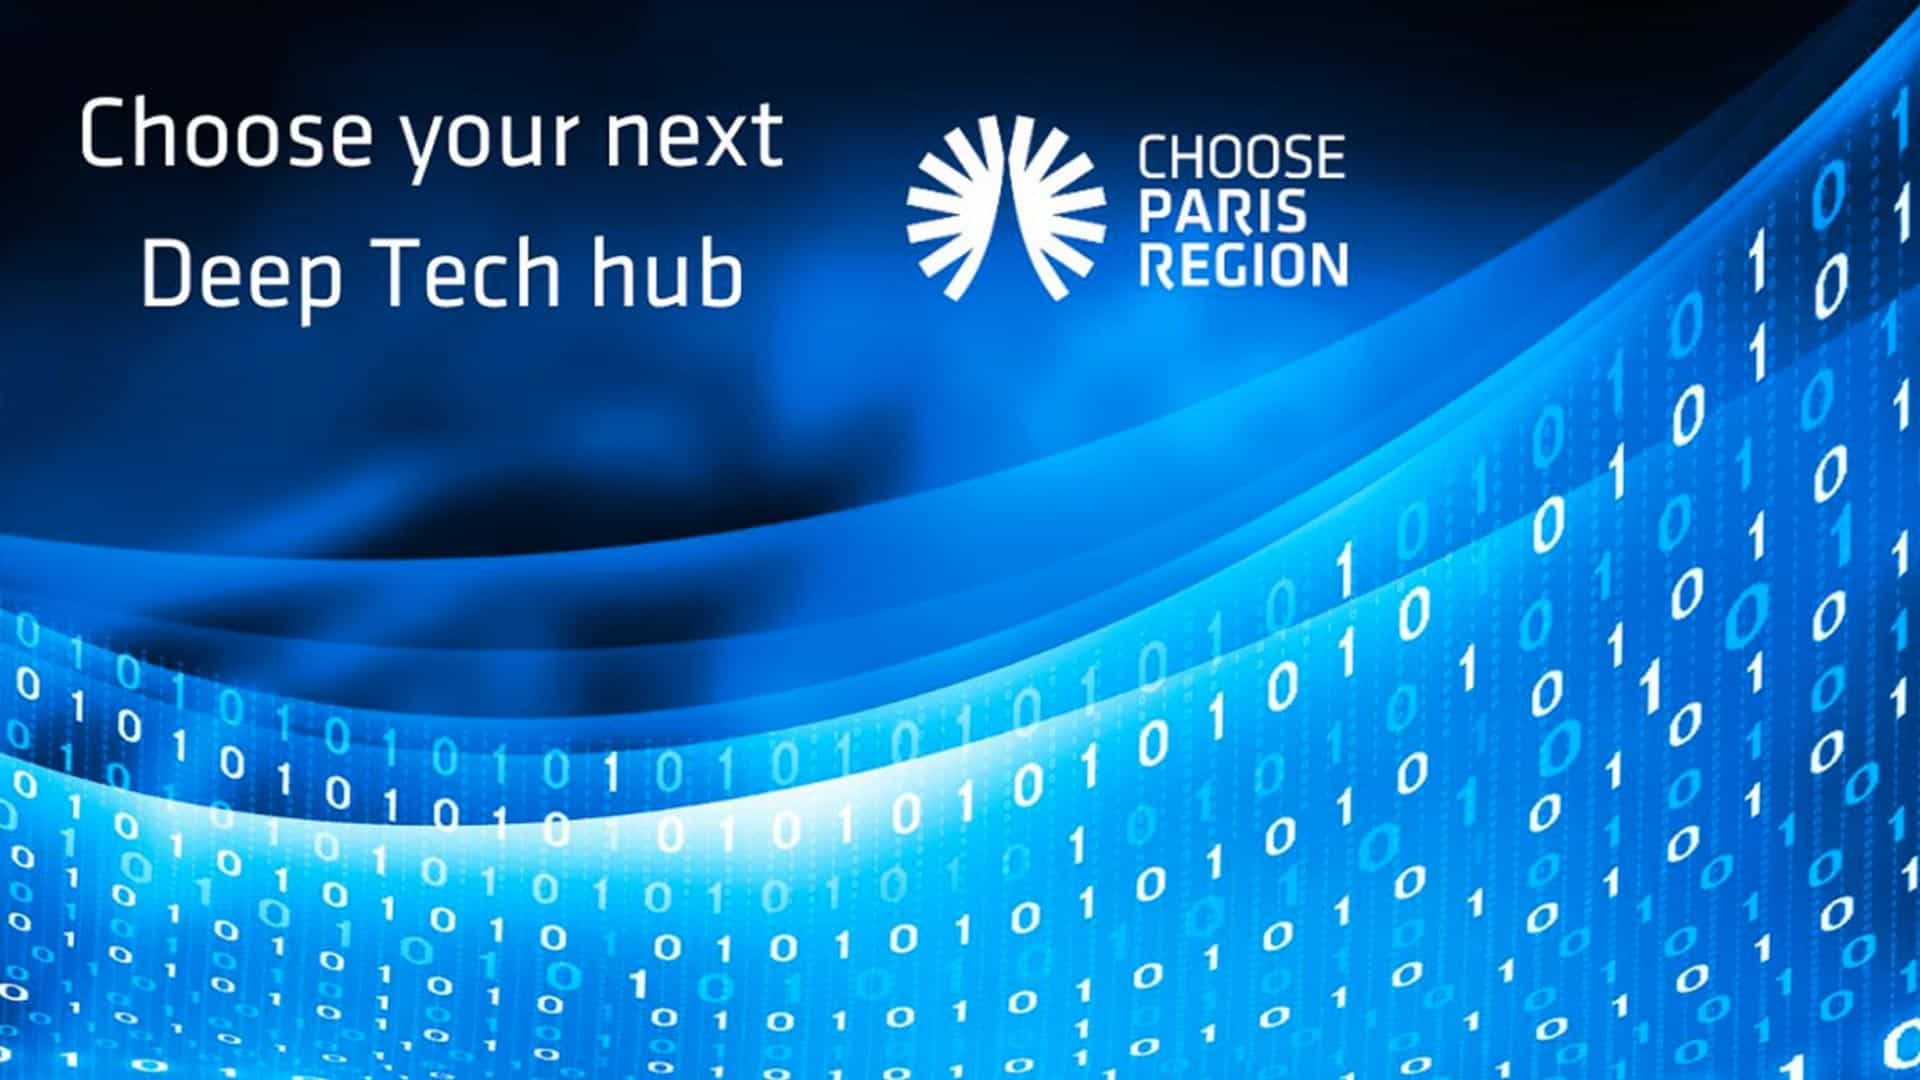 A promising future for DeepTech in Paris Region